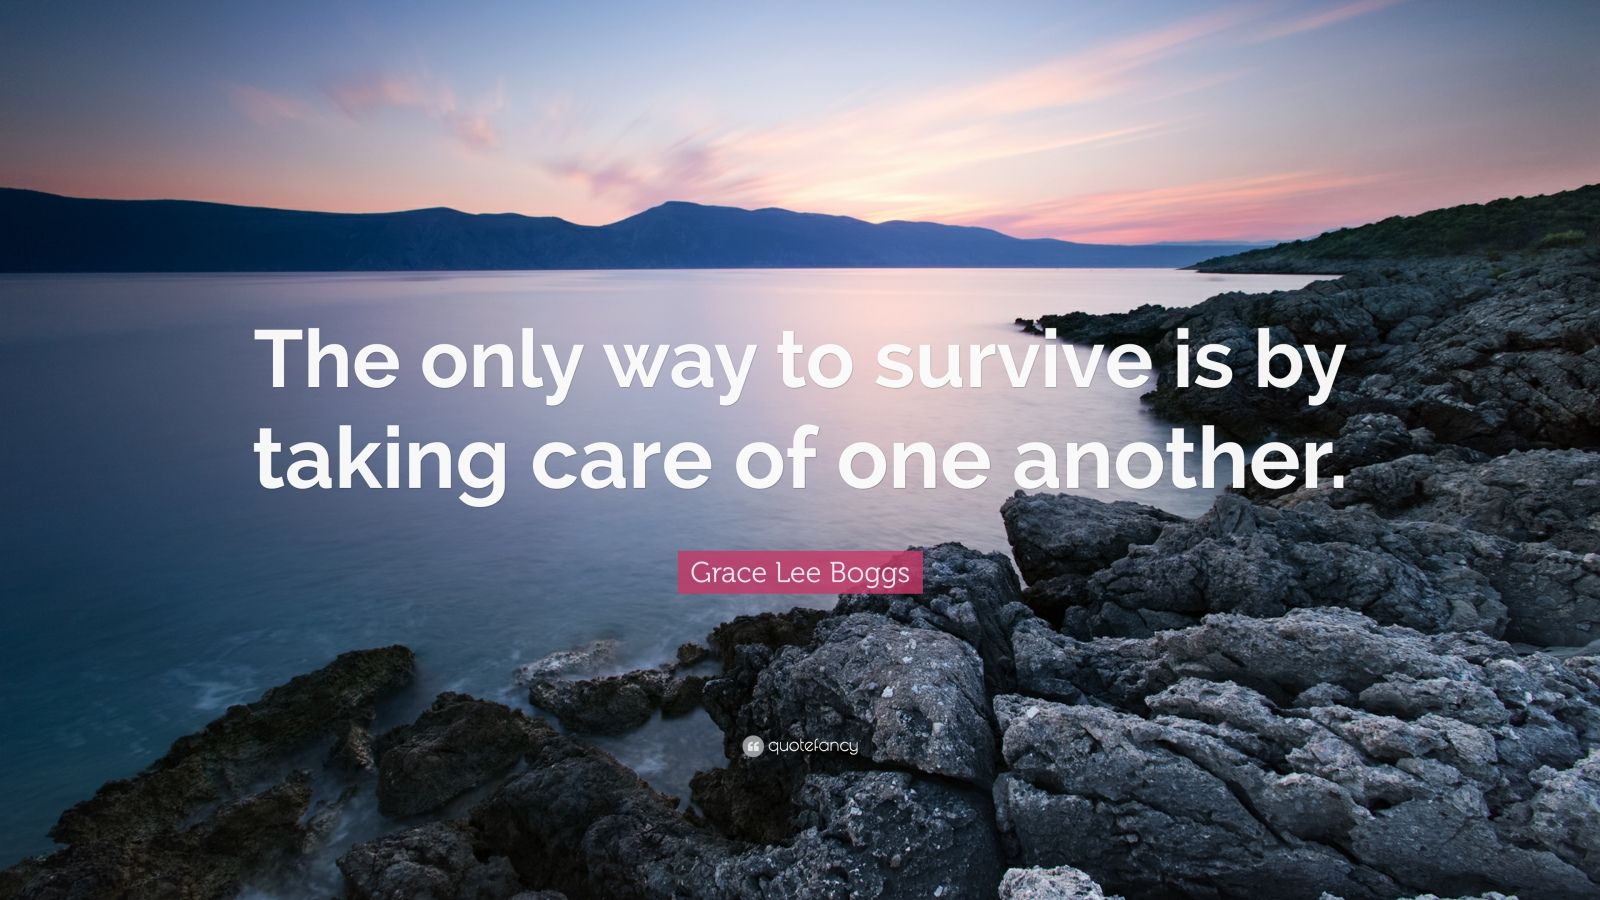 Grace Lee Boggs Quote: “The only way to survive is by taking care of